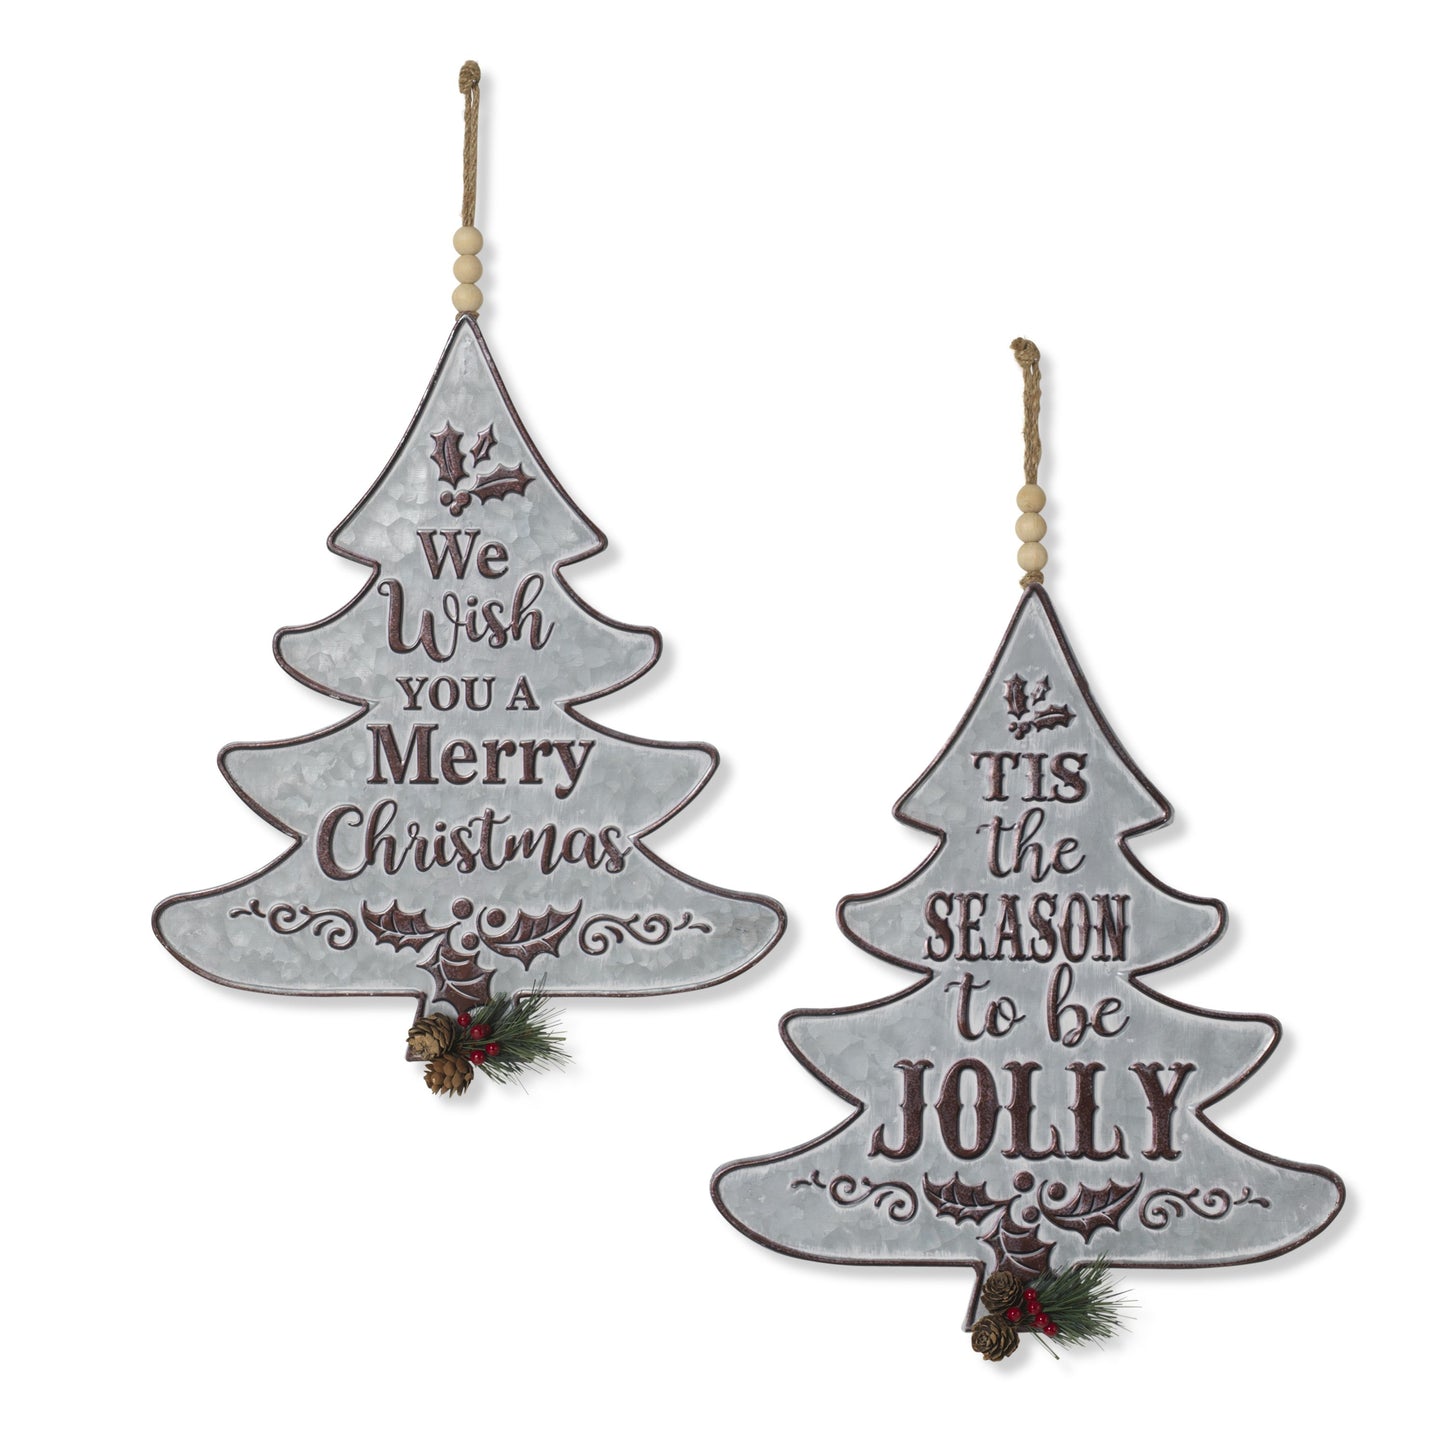 Gerson Company 16"H Metal Christmas Tree Ornament W/ Pine Accent, 2 Asst